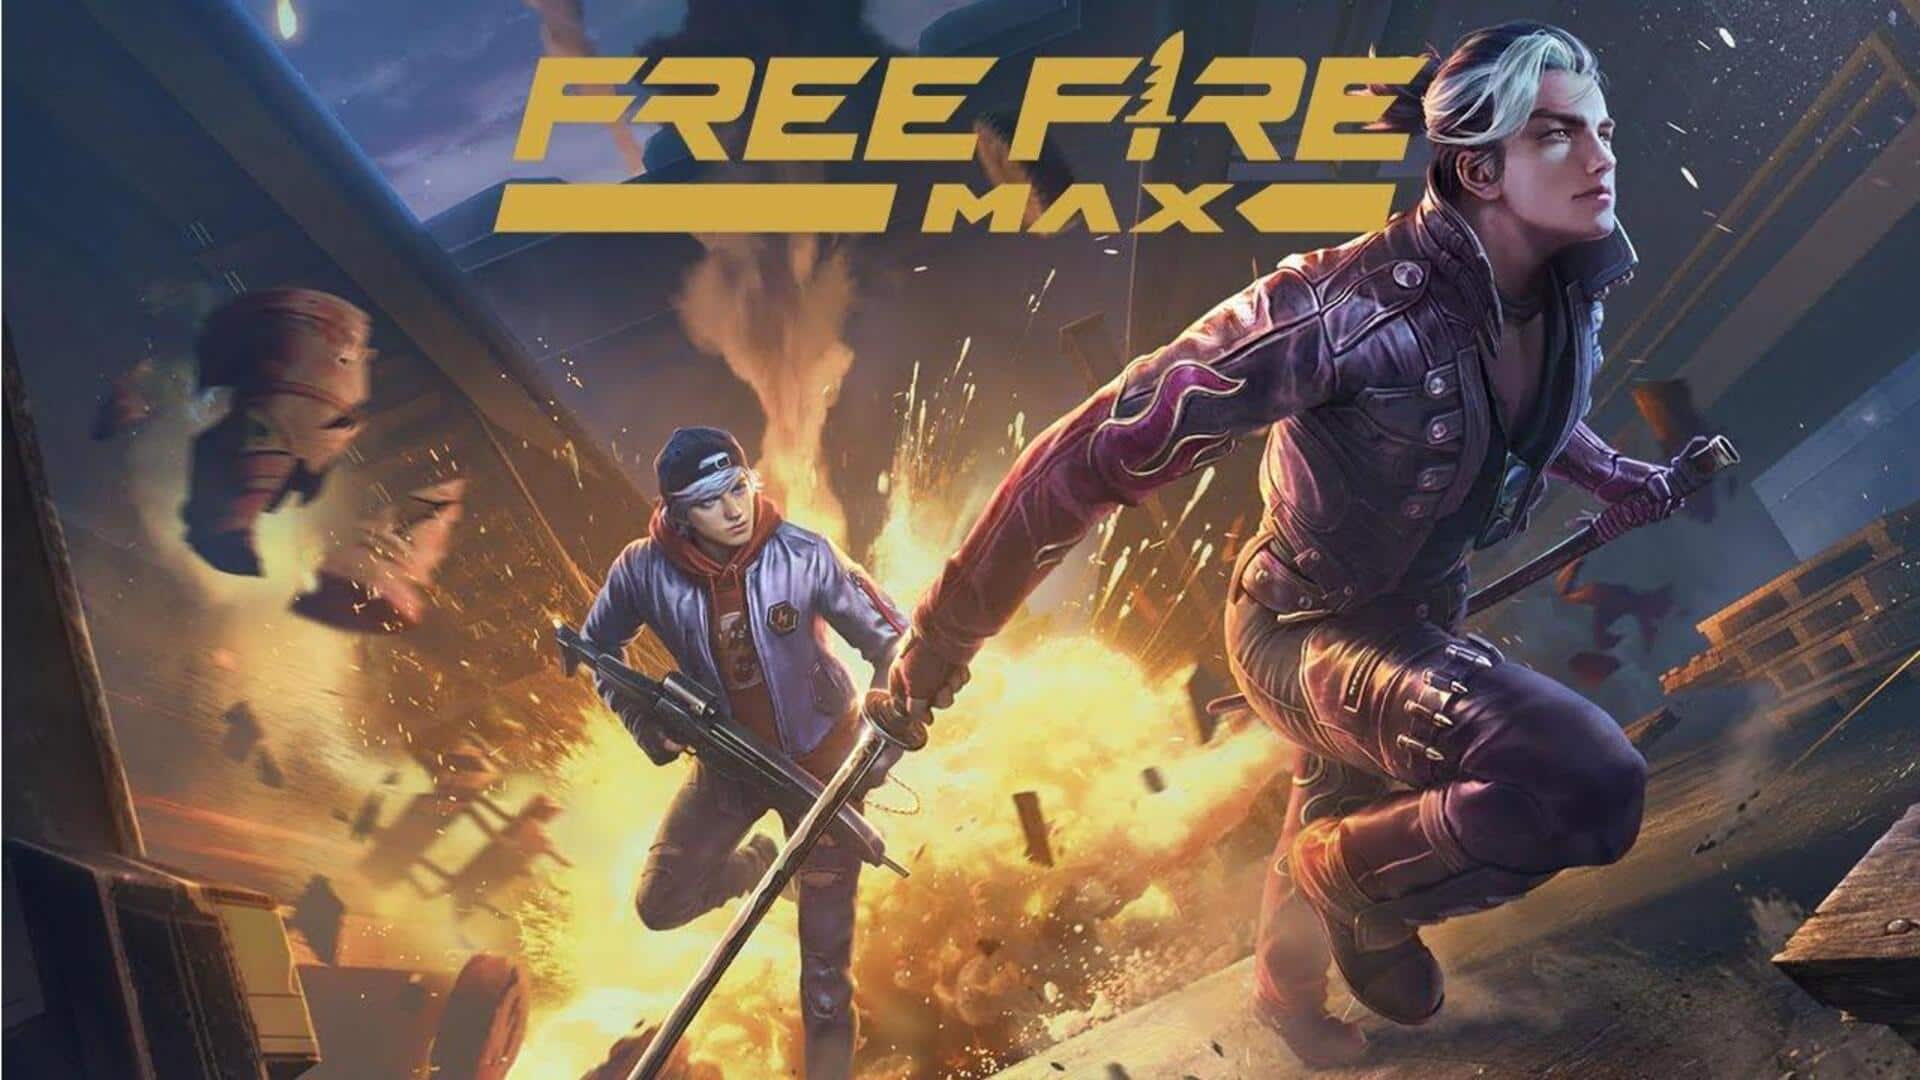 Garena Free Fire MAX's July 8 codes: Claim in-game items